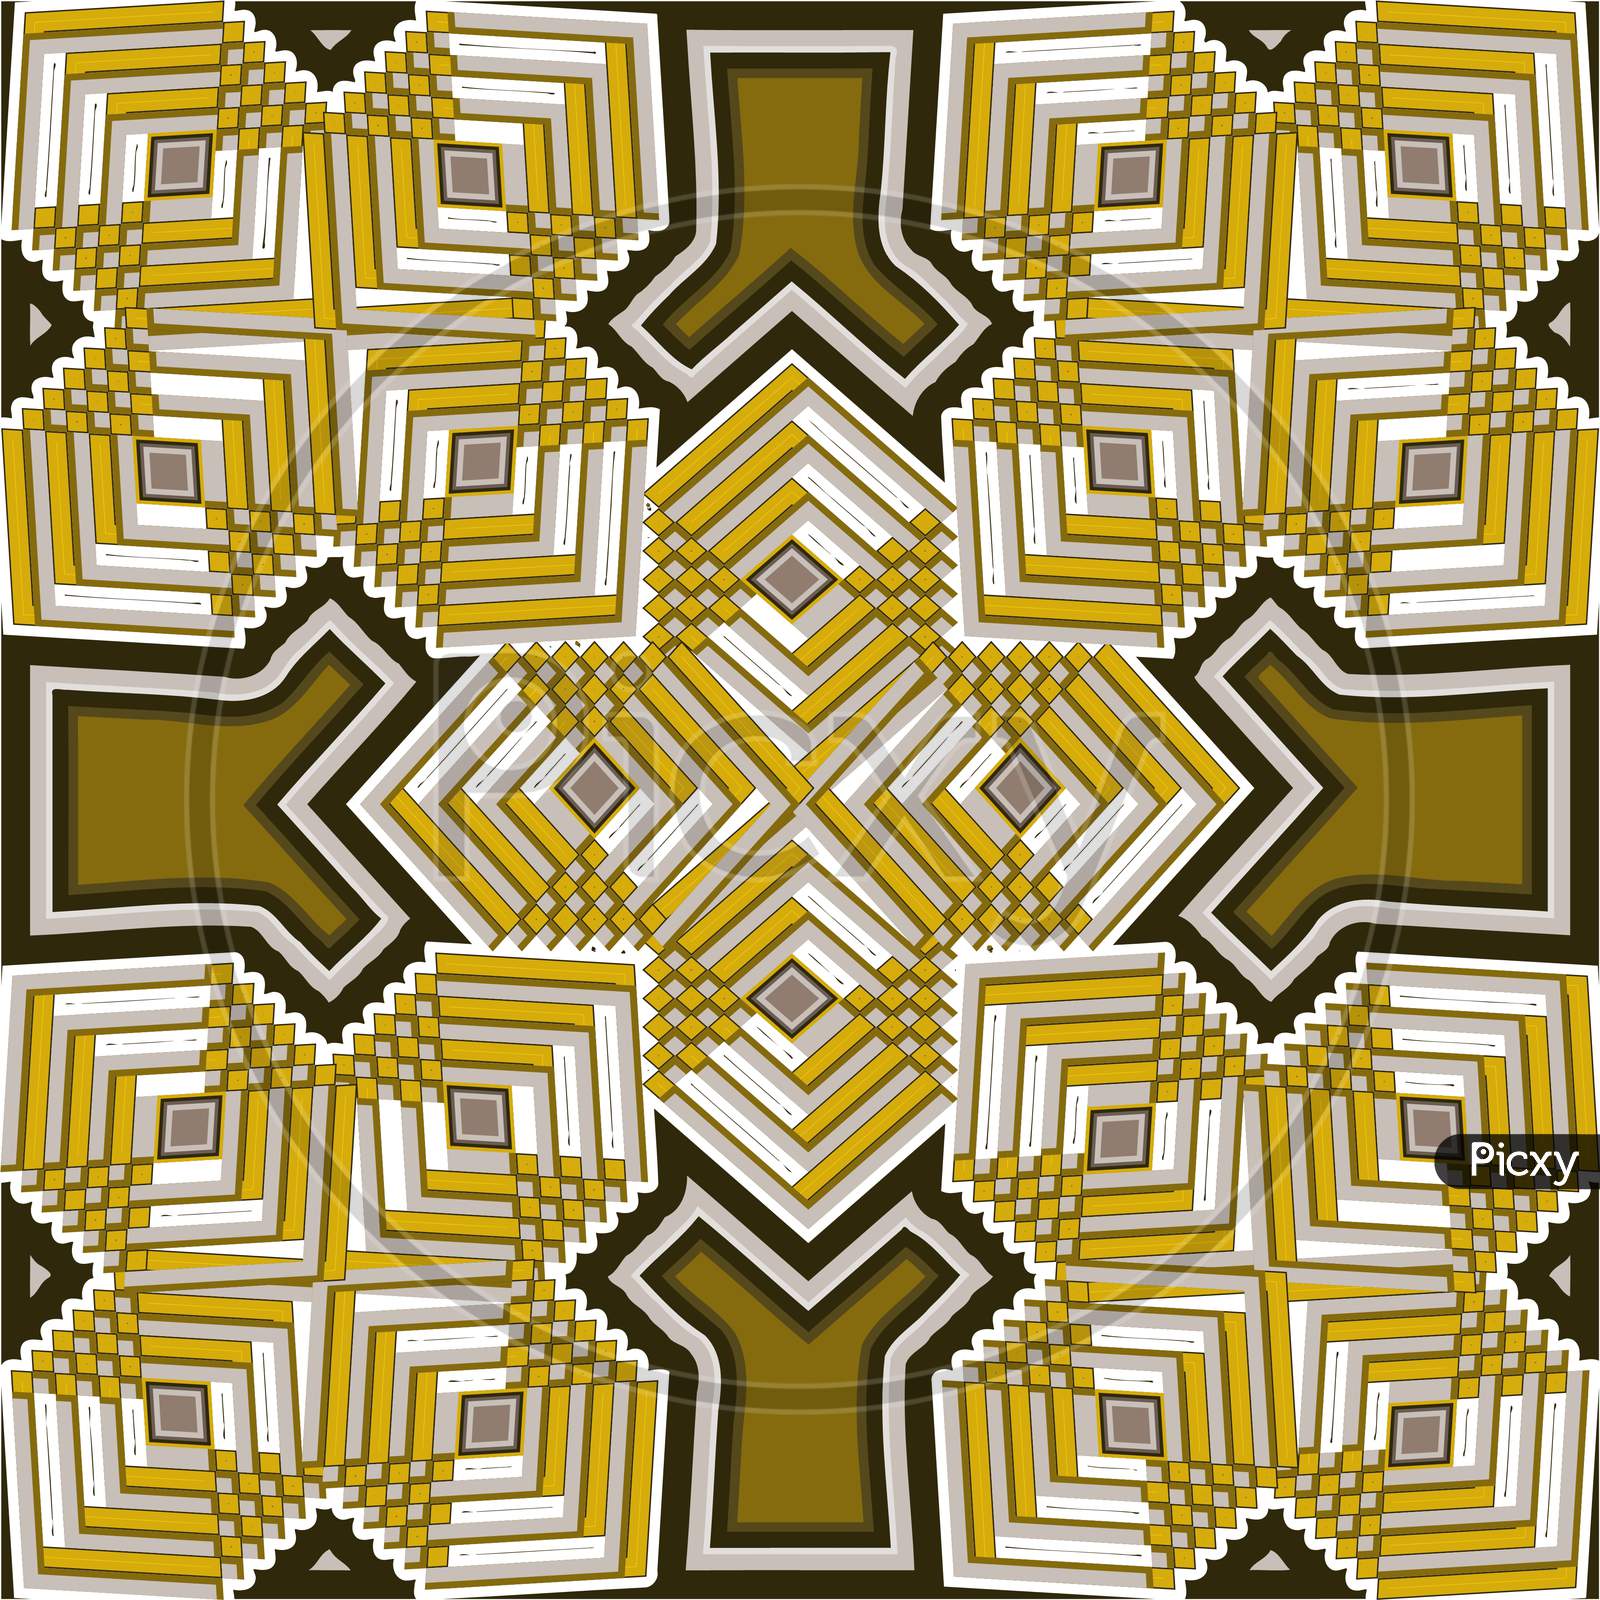 Picture Of A Golden Color, Triangle Shape, Graphic Design Having In Abstract Stripes.